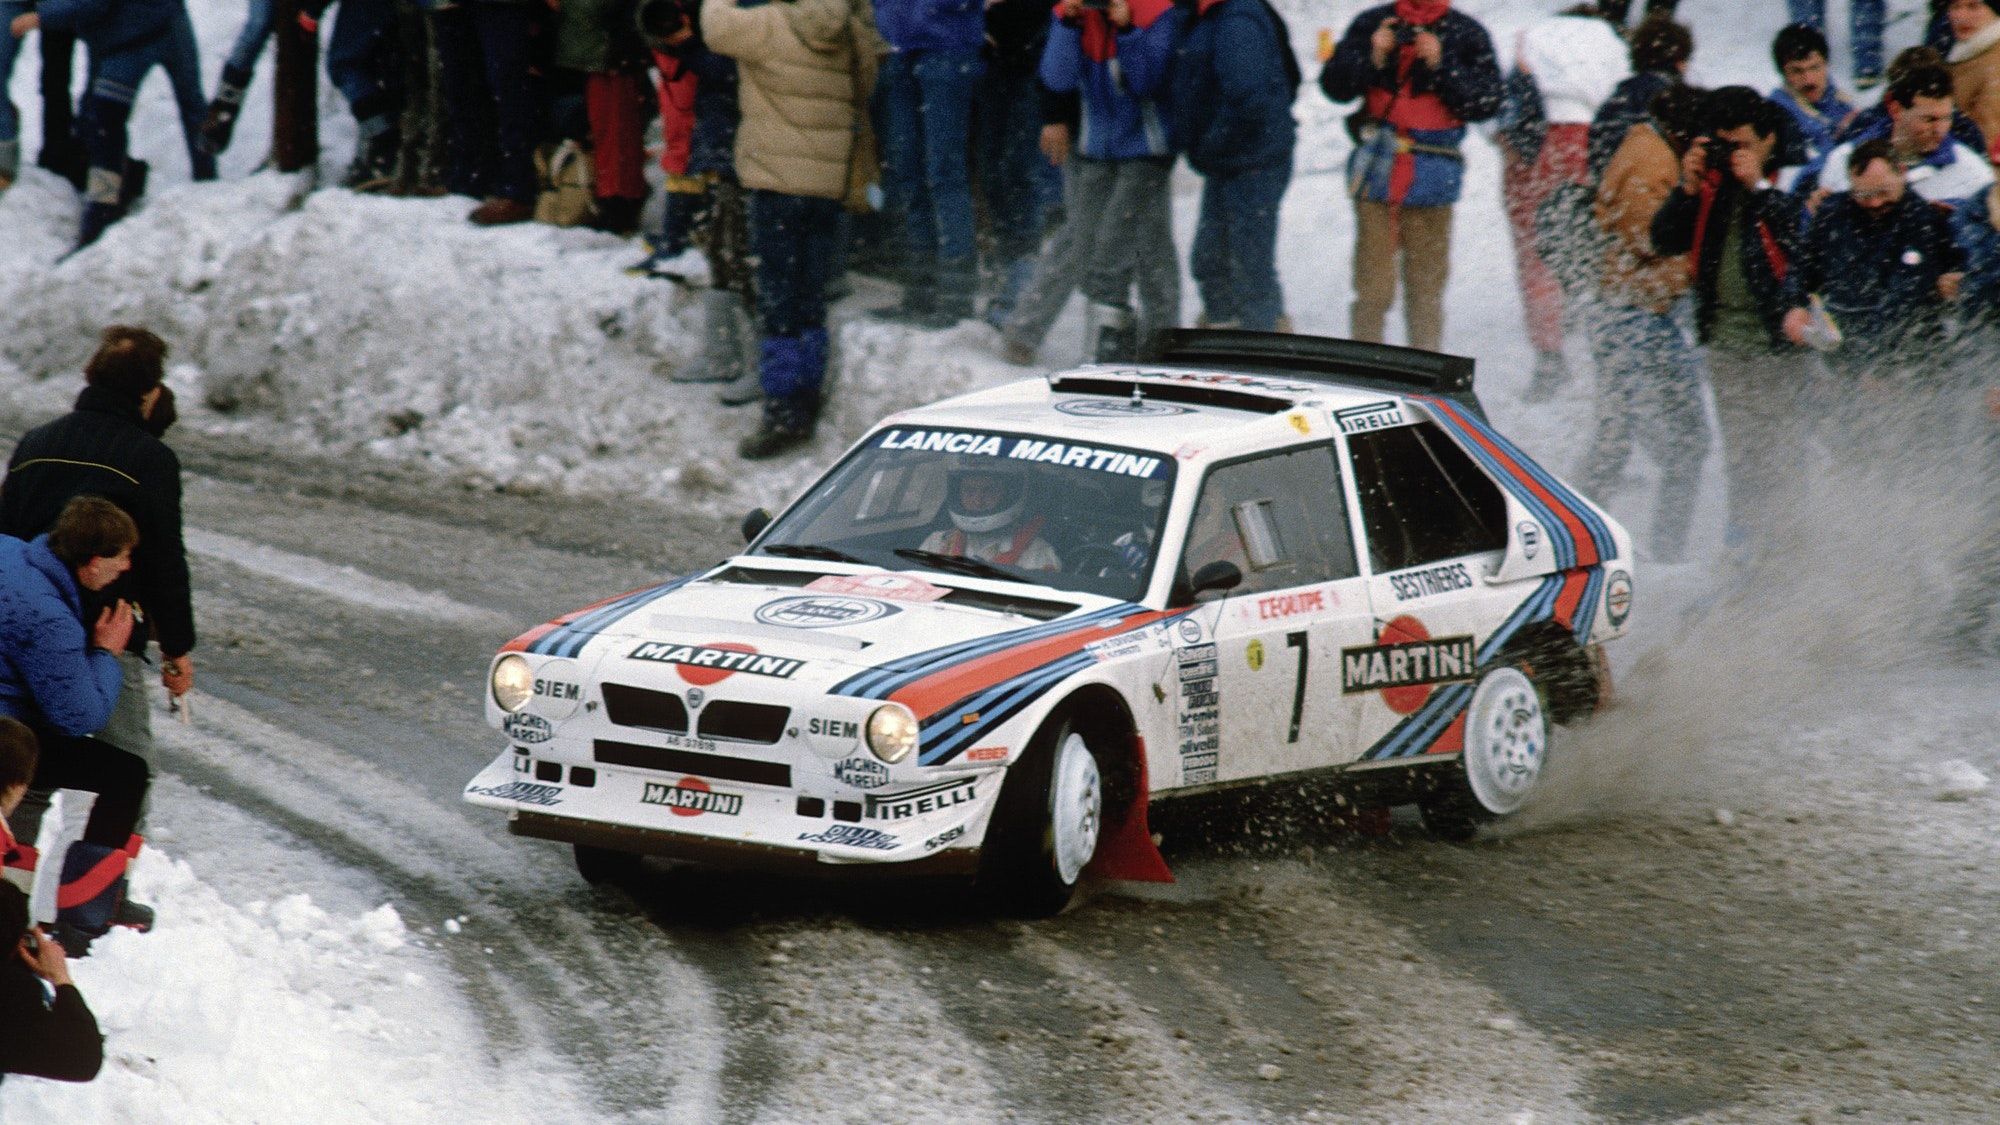 A Lancia Delta S4 on a race track